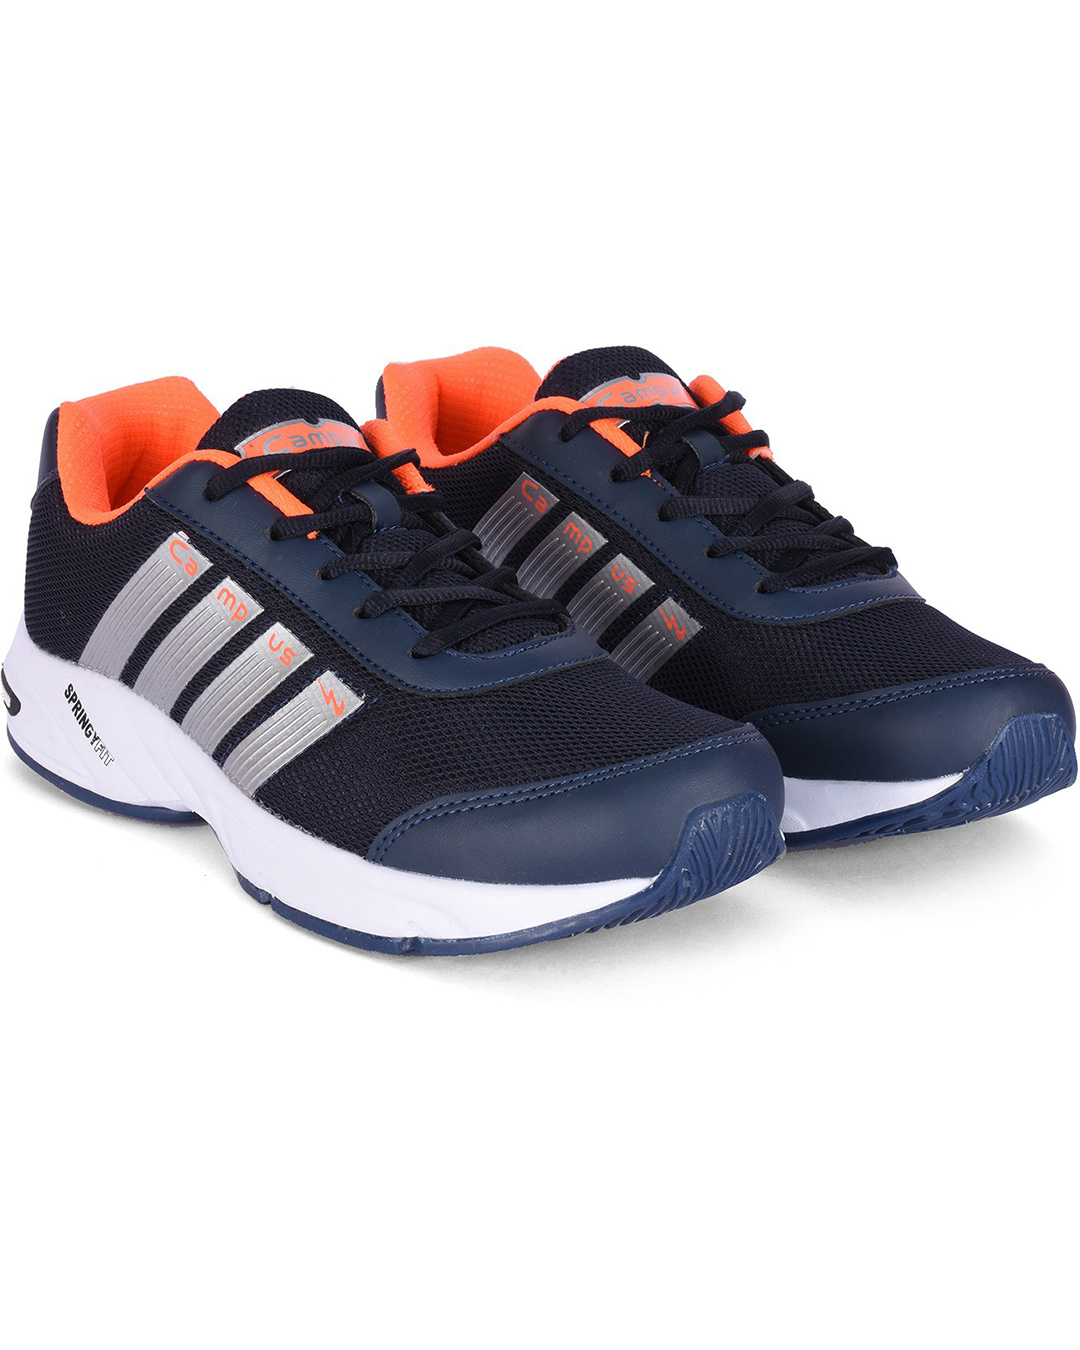 Buy Campus Men's Black Bull Pro Striped Sports Shoes Online in India at ...